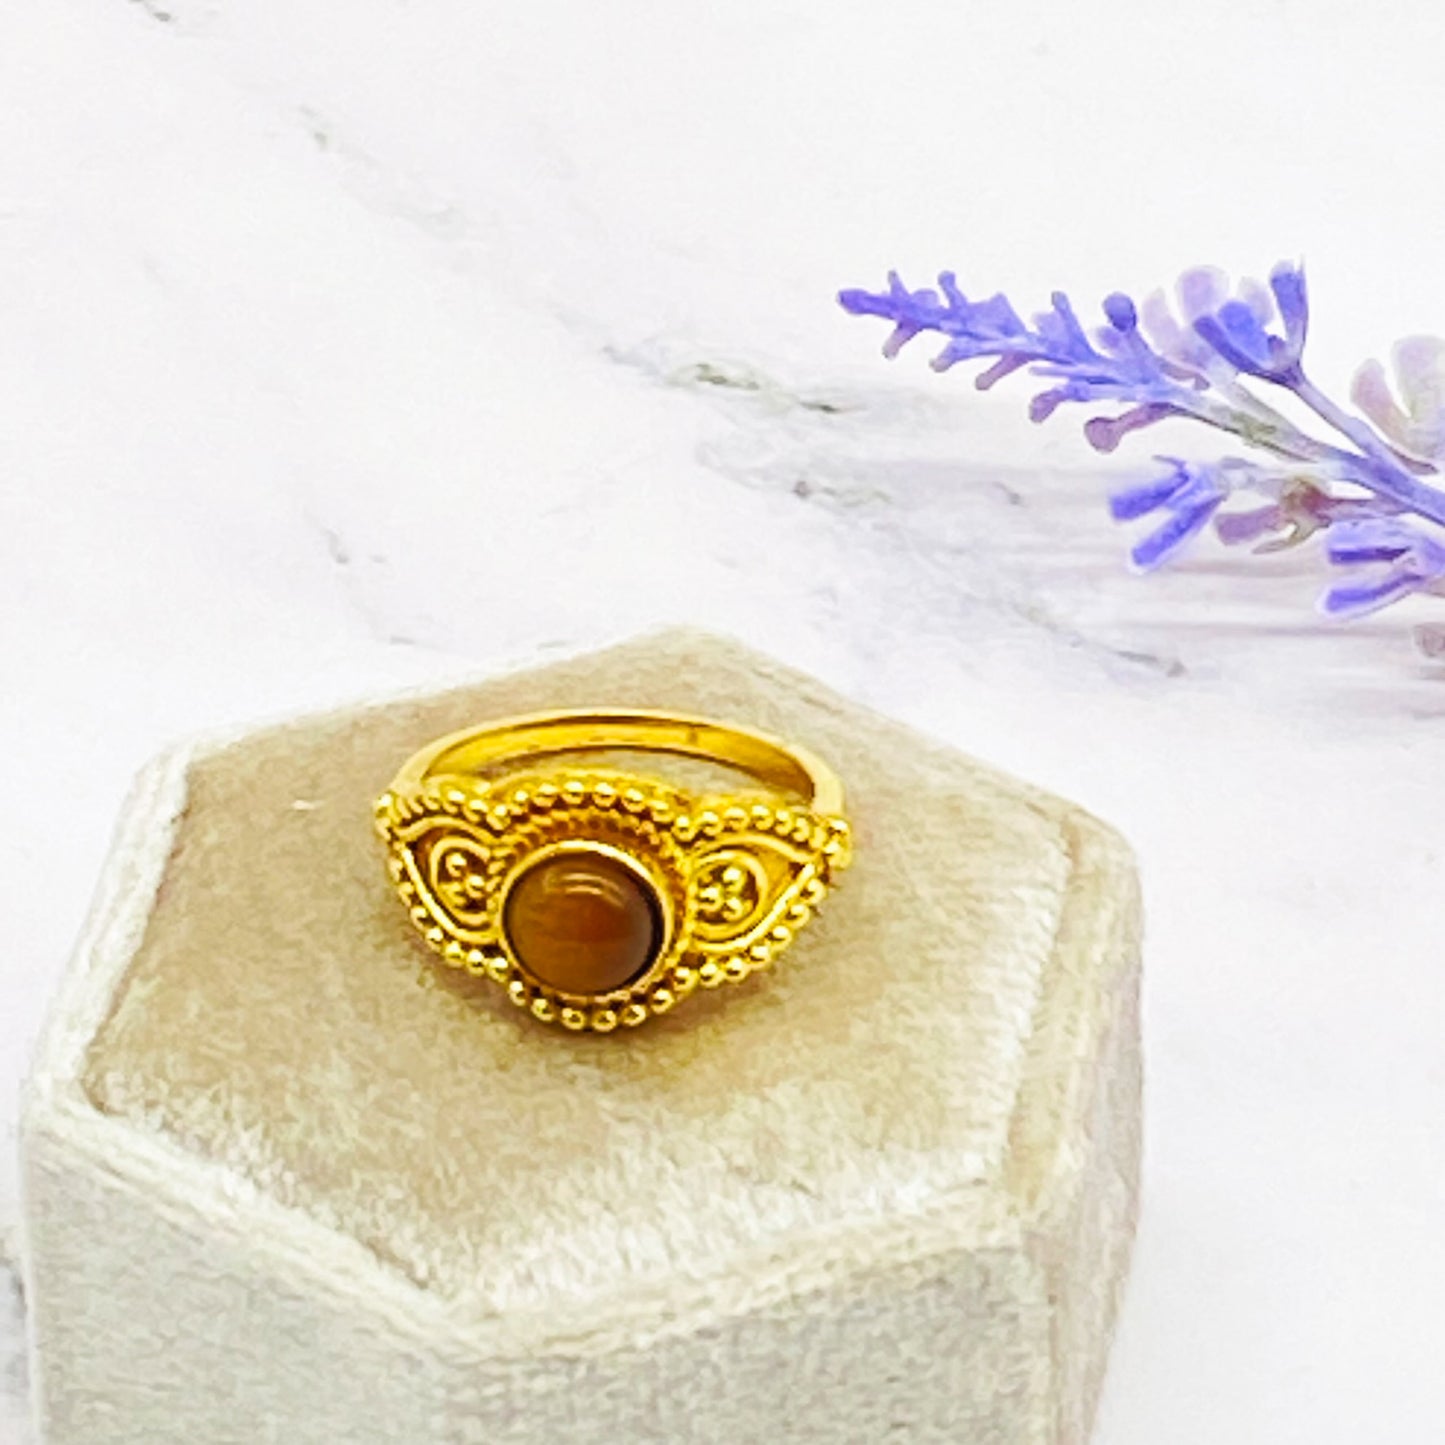 Gold Filled Crystal Ring, Handmade Ring, Statement Jewelry, Bohemian Ring, Gift For Her, Gemstone Ring, Healing Crystals